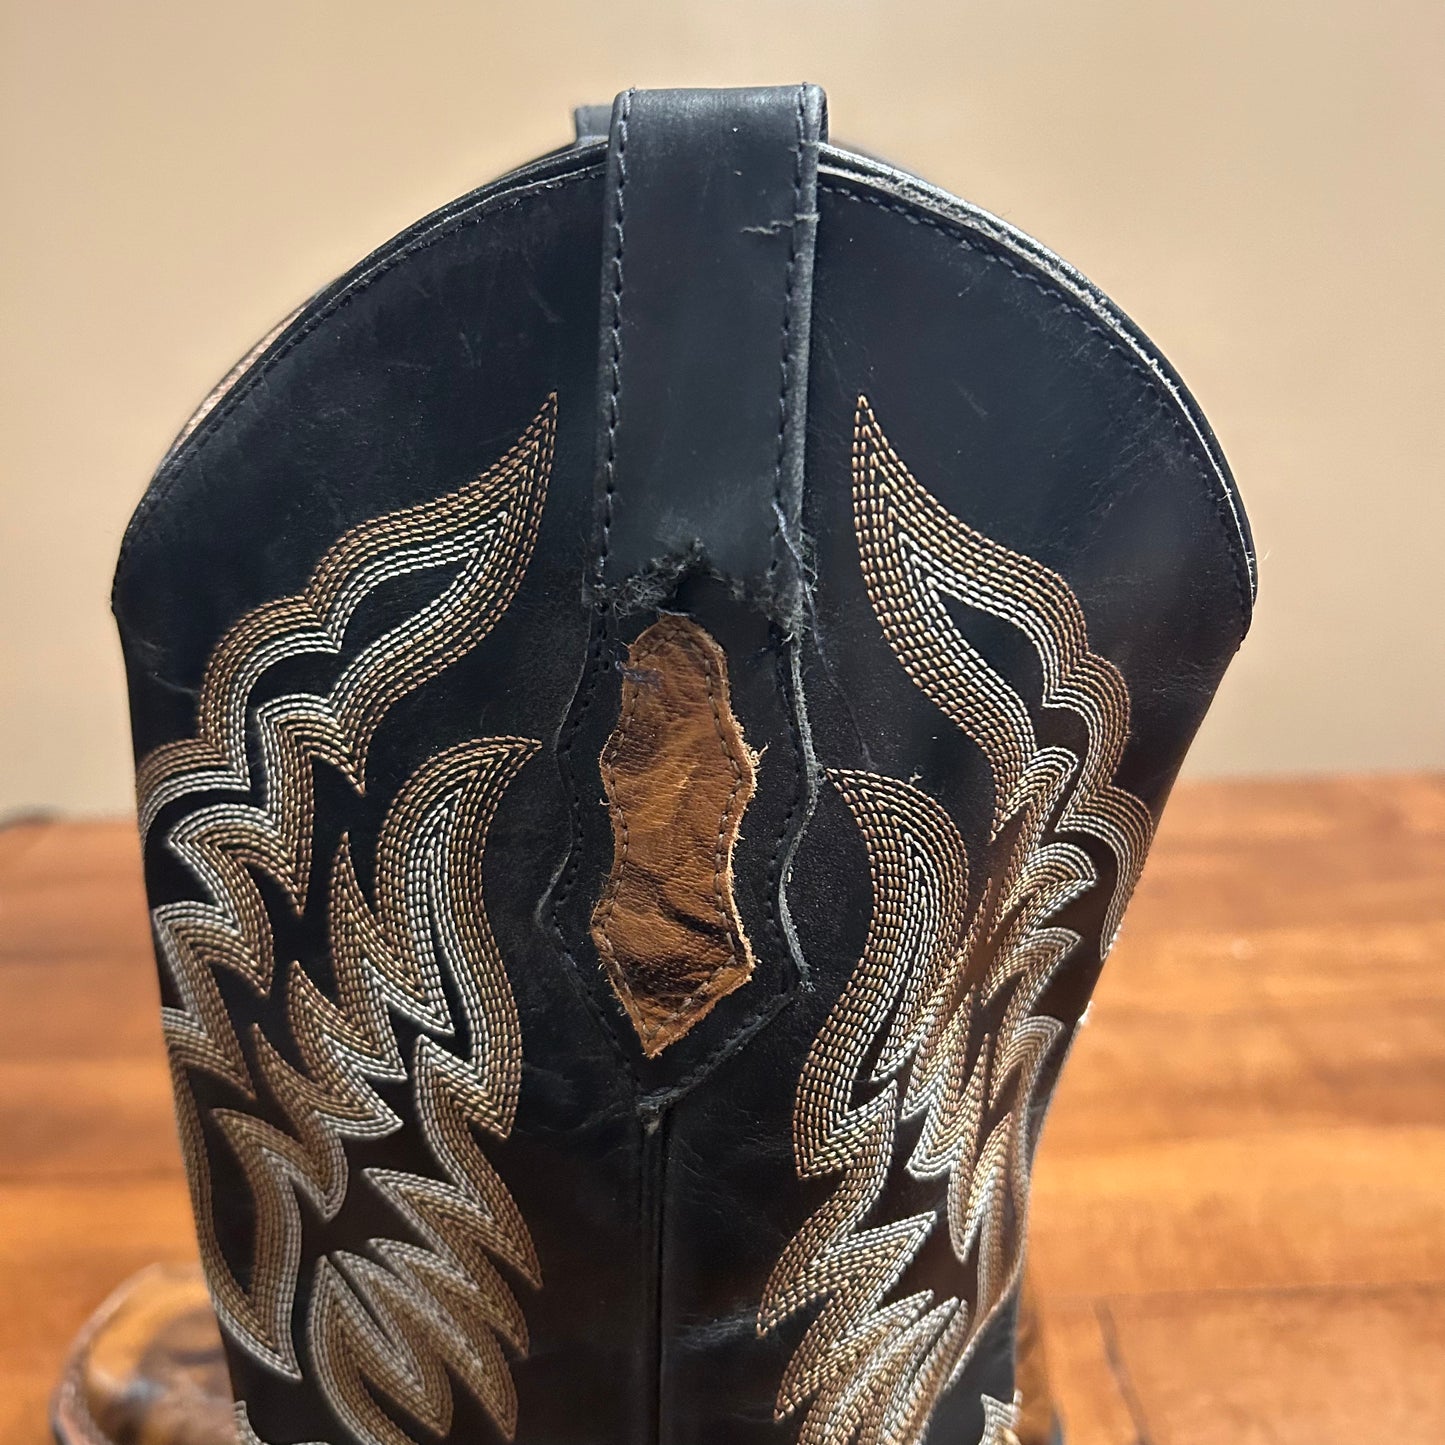 Gypsy Rose Square Toe Cowboy Boots Men’s Size 6.5 Women’s Size 8